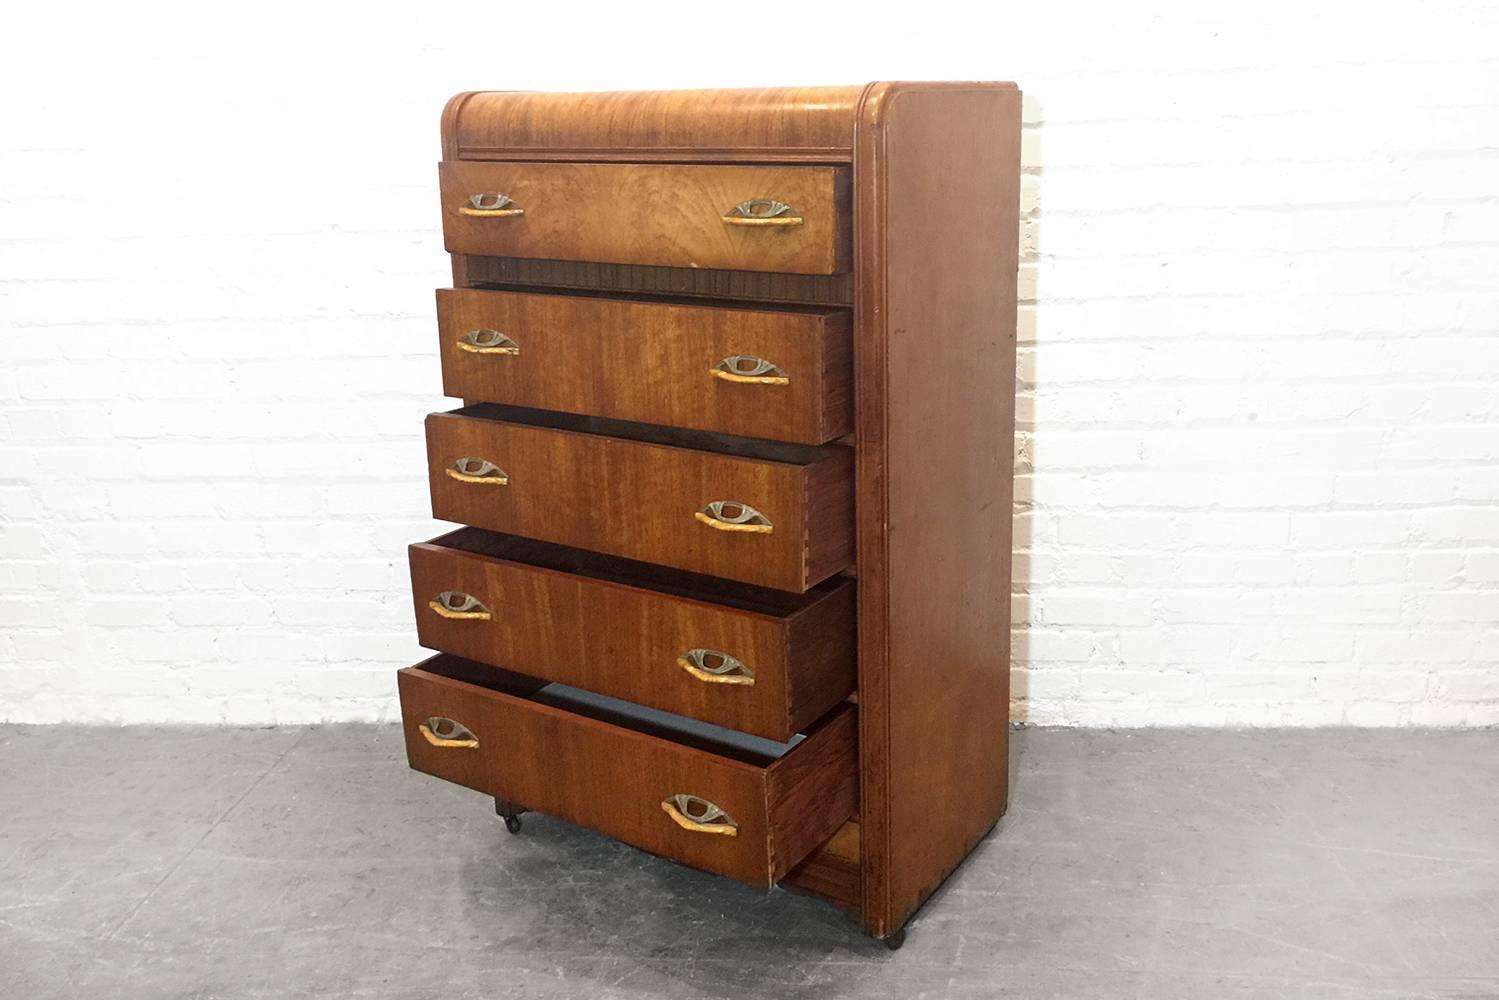 Gorgeous burl wood dresser with rare sculpted brass and bakelite handles. Classic deco shape and details.

Dimensions: 17